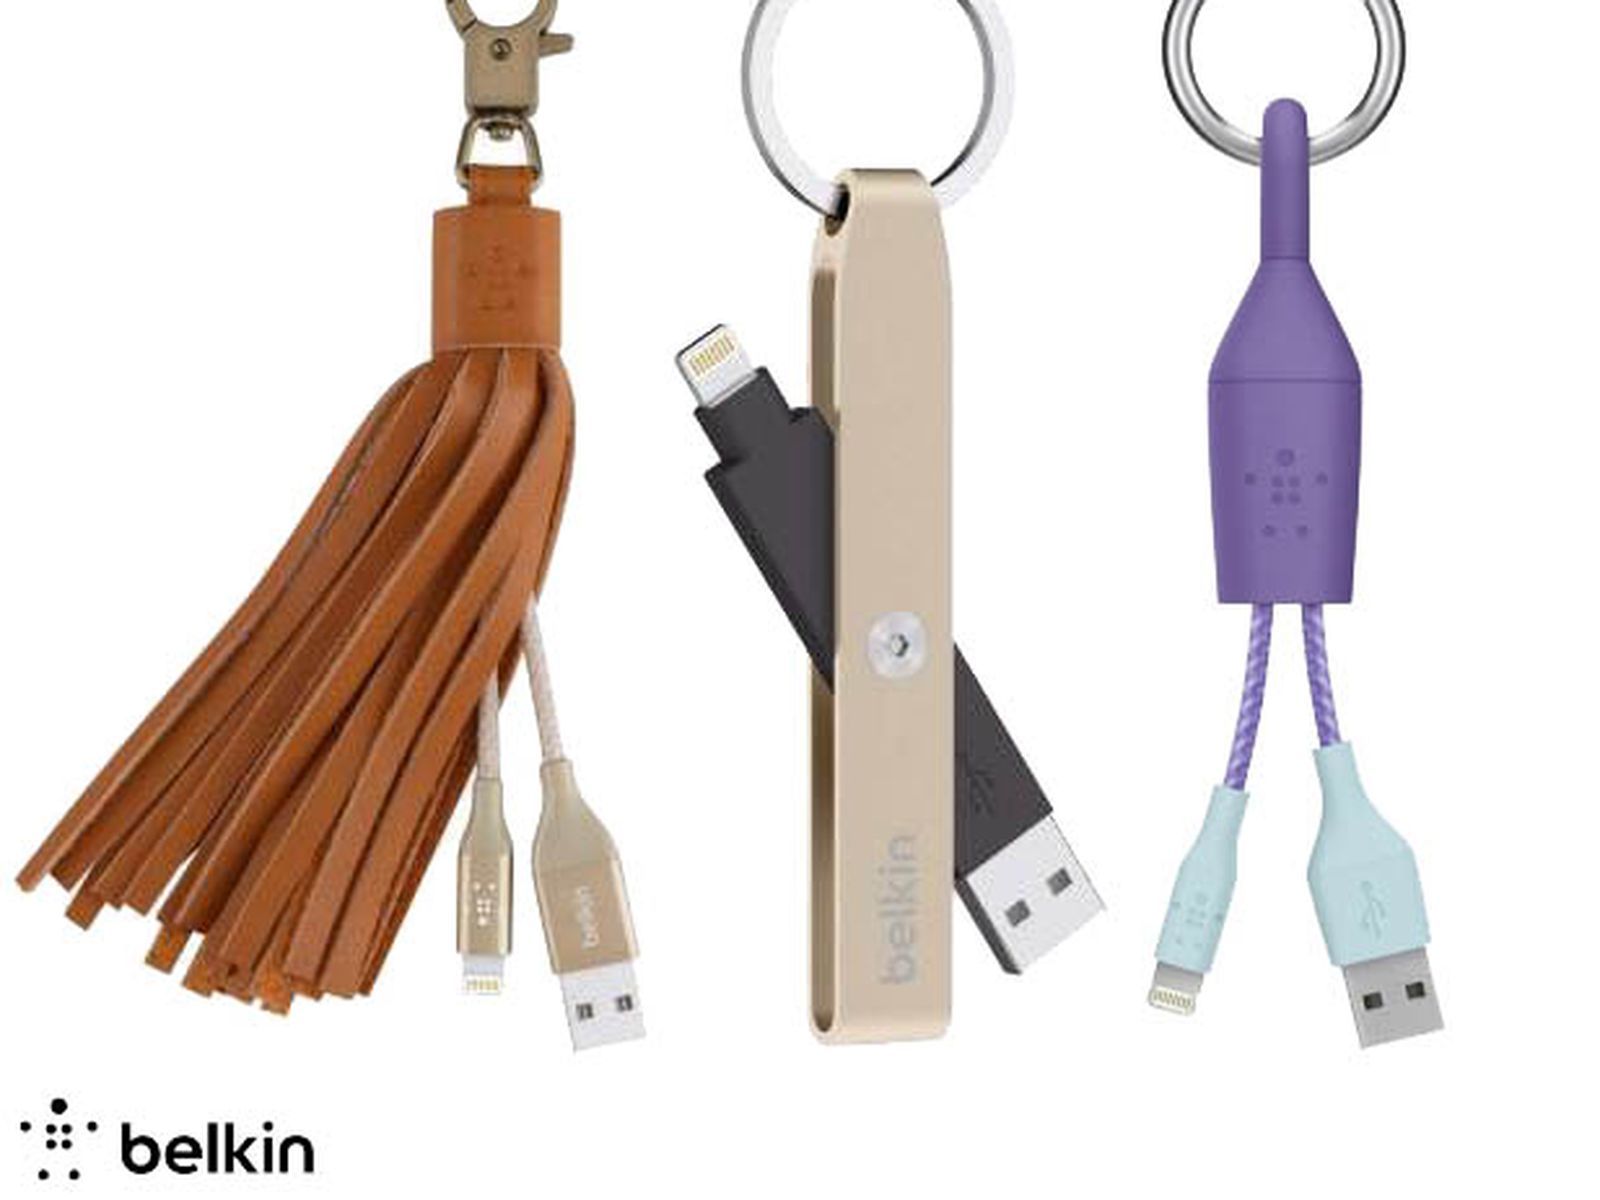 Belkin MIXIT Lightning to USB Keychain Chargers - MacRumors